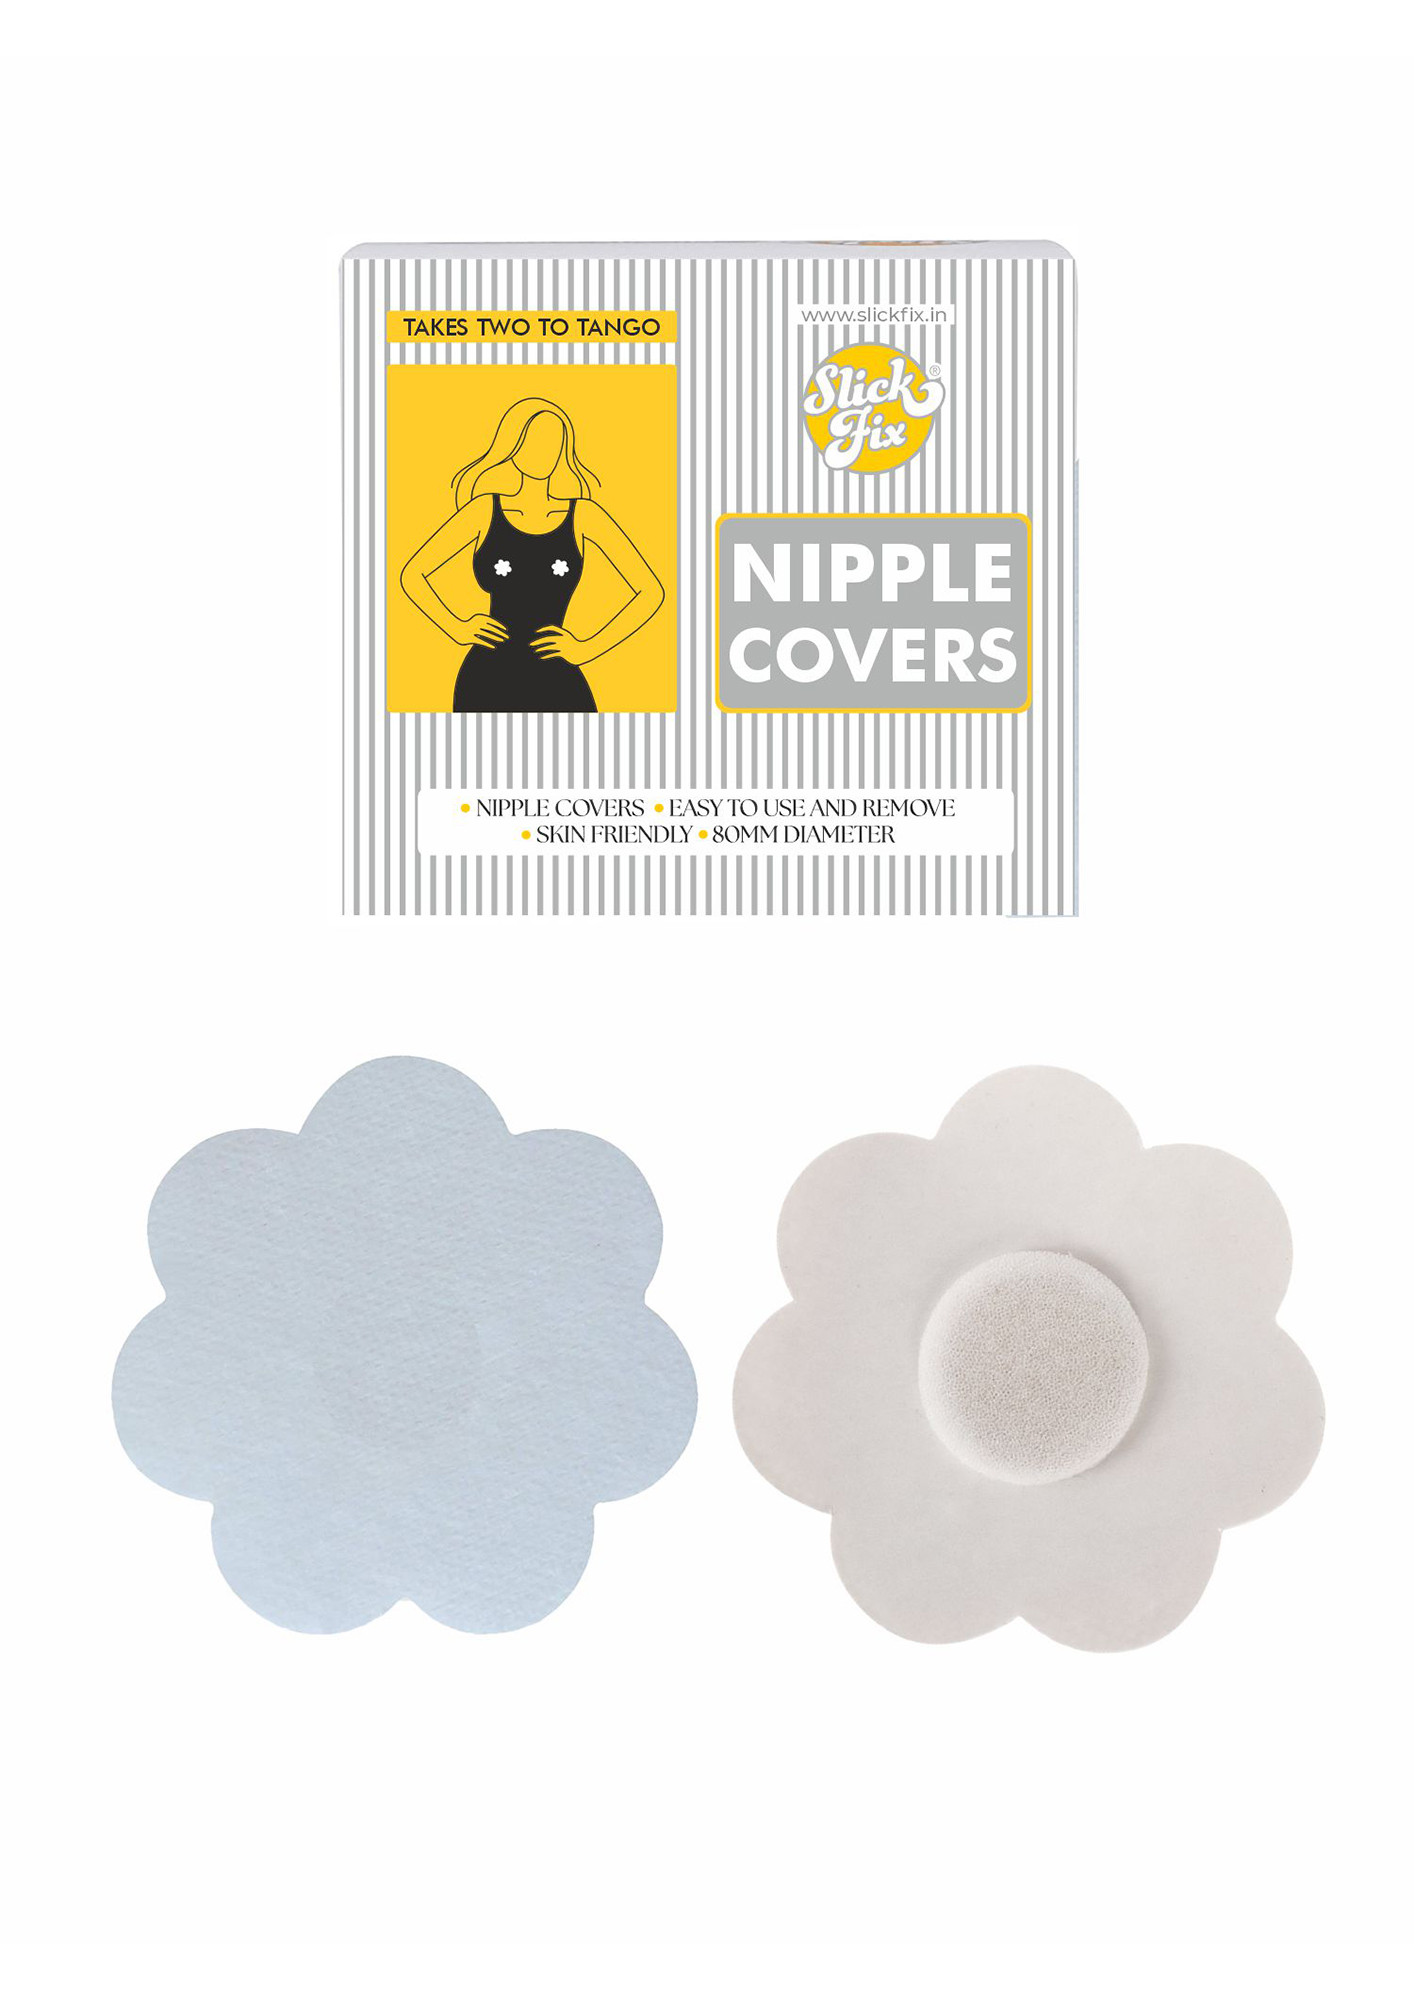 SLICKFIX Self Adhesive Nipple Covers (White Colour) Pack of 100 Nipple Pasties, Nipple Protectors, Bra-Free Clothing, Disposable, Nipple Stickers, Breast Covers